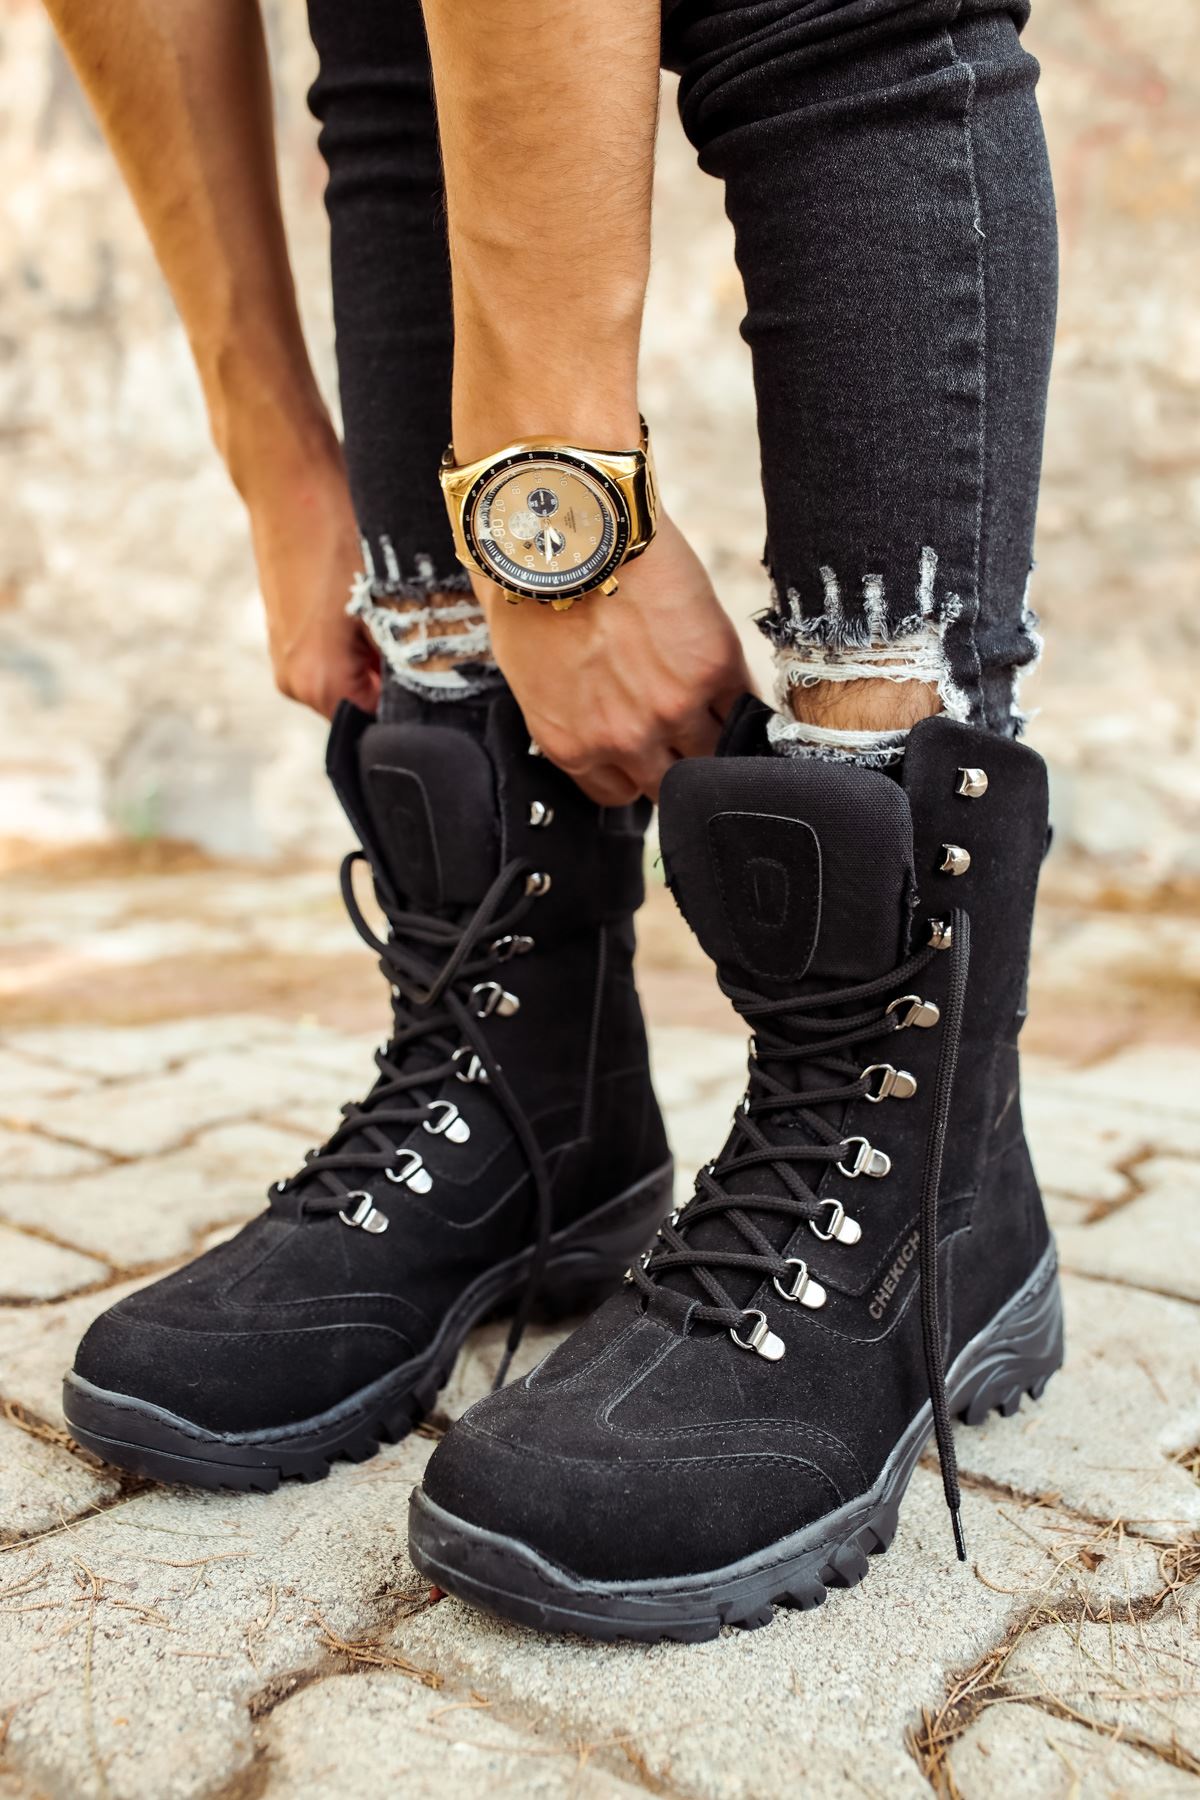 CH051 Men's Suede Black Casual Sports Sneaker Boots - STREETMODE™